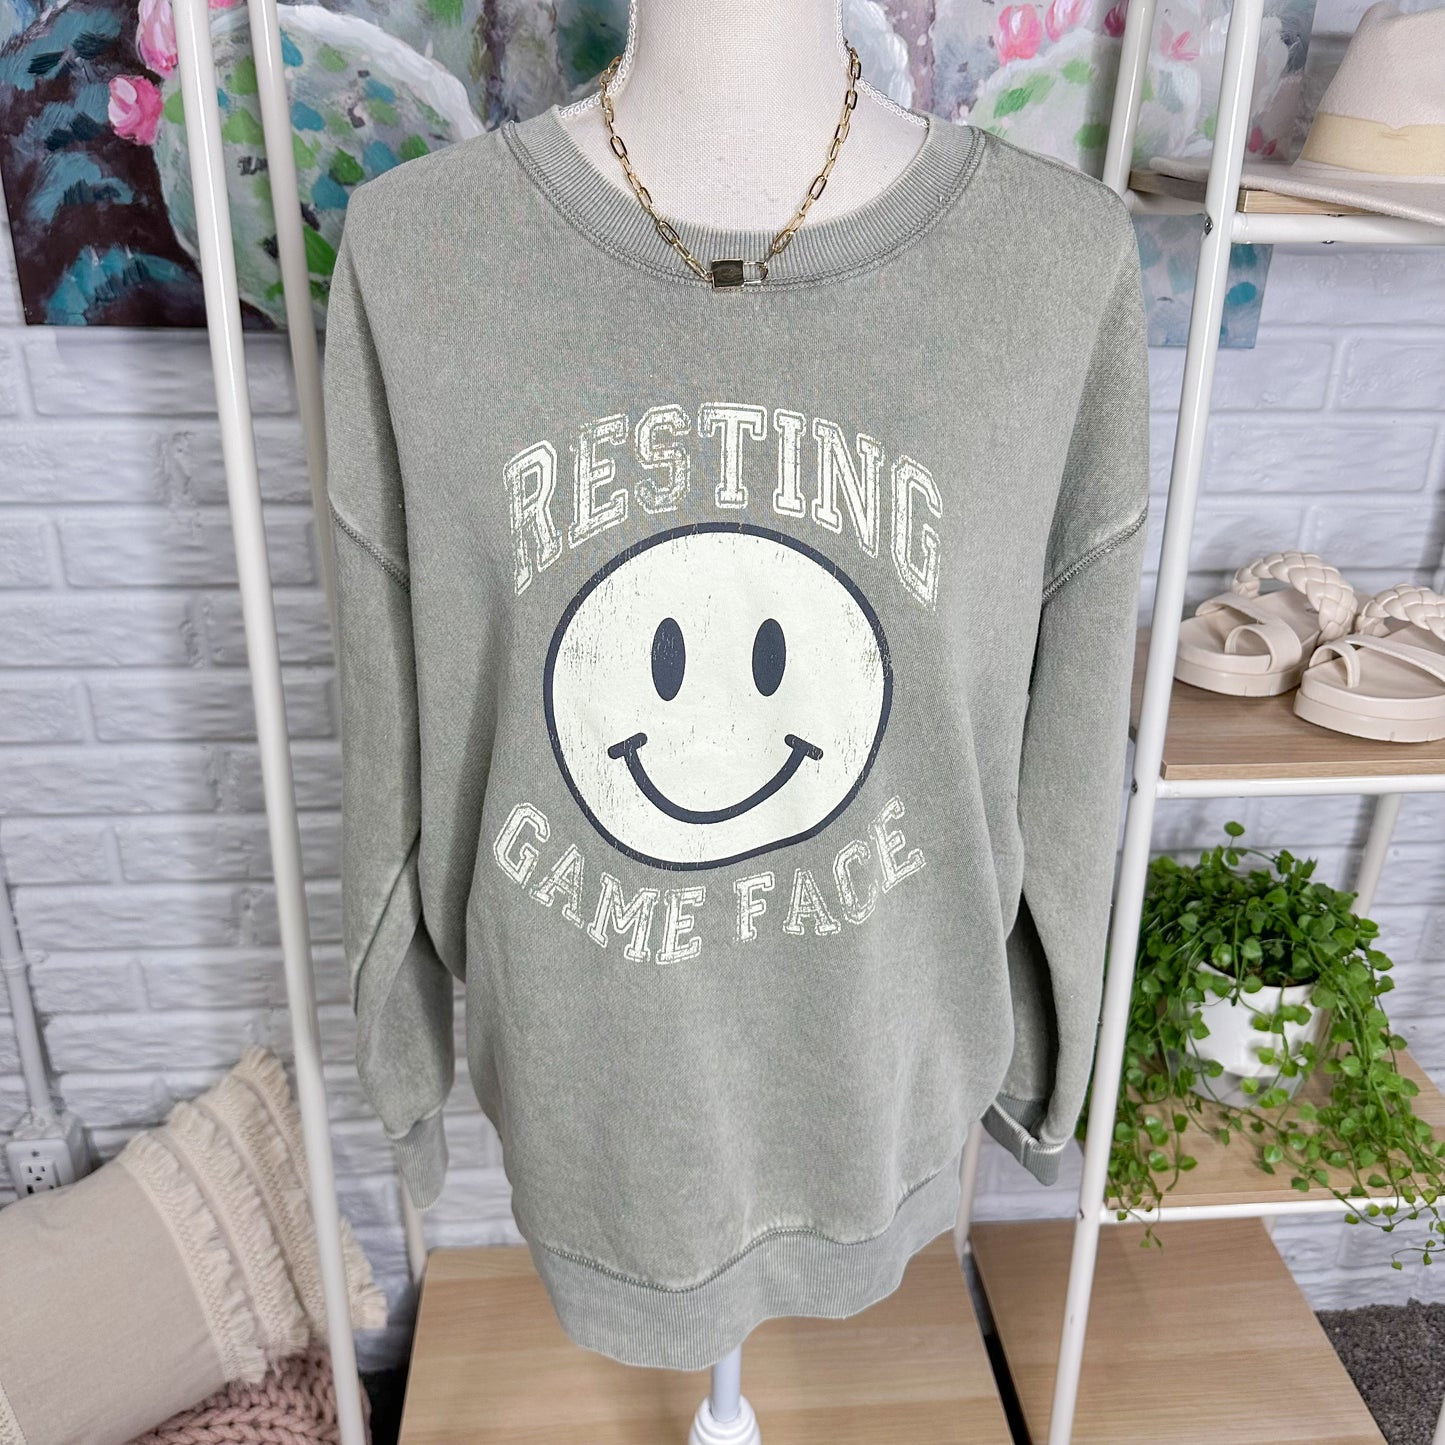 Maurice’s Resting Game Face Sweatshirt Size XS